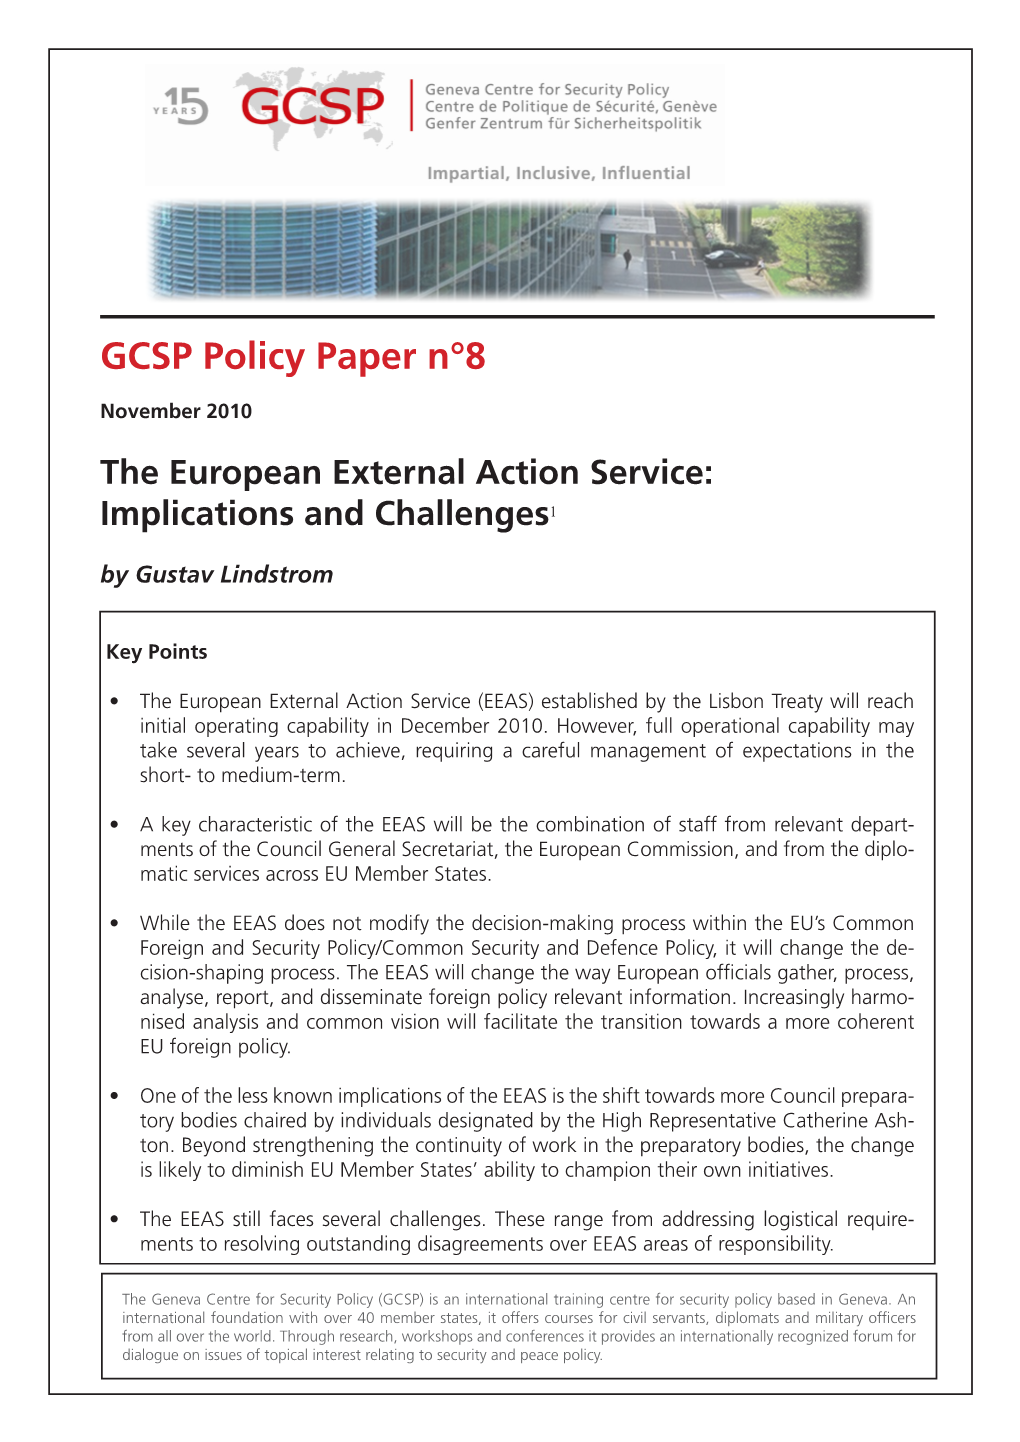 The European External Action Service: Implications and Challenges1 by Gustav Lindstrom